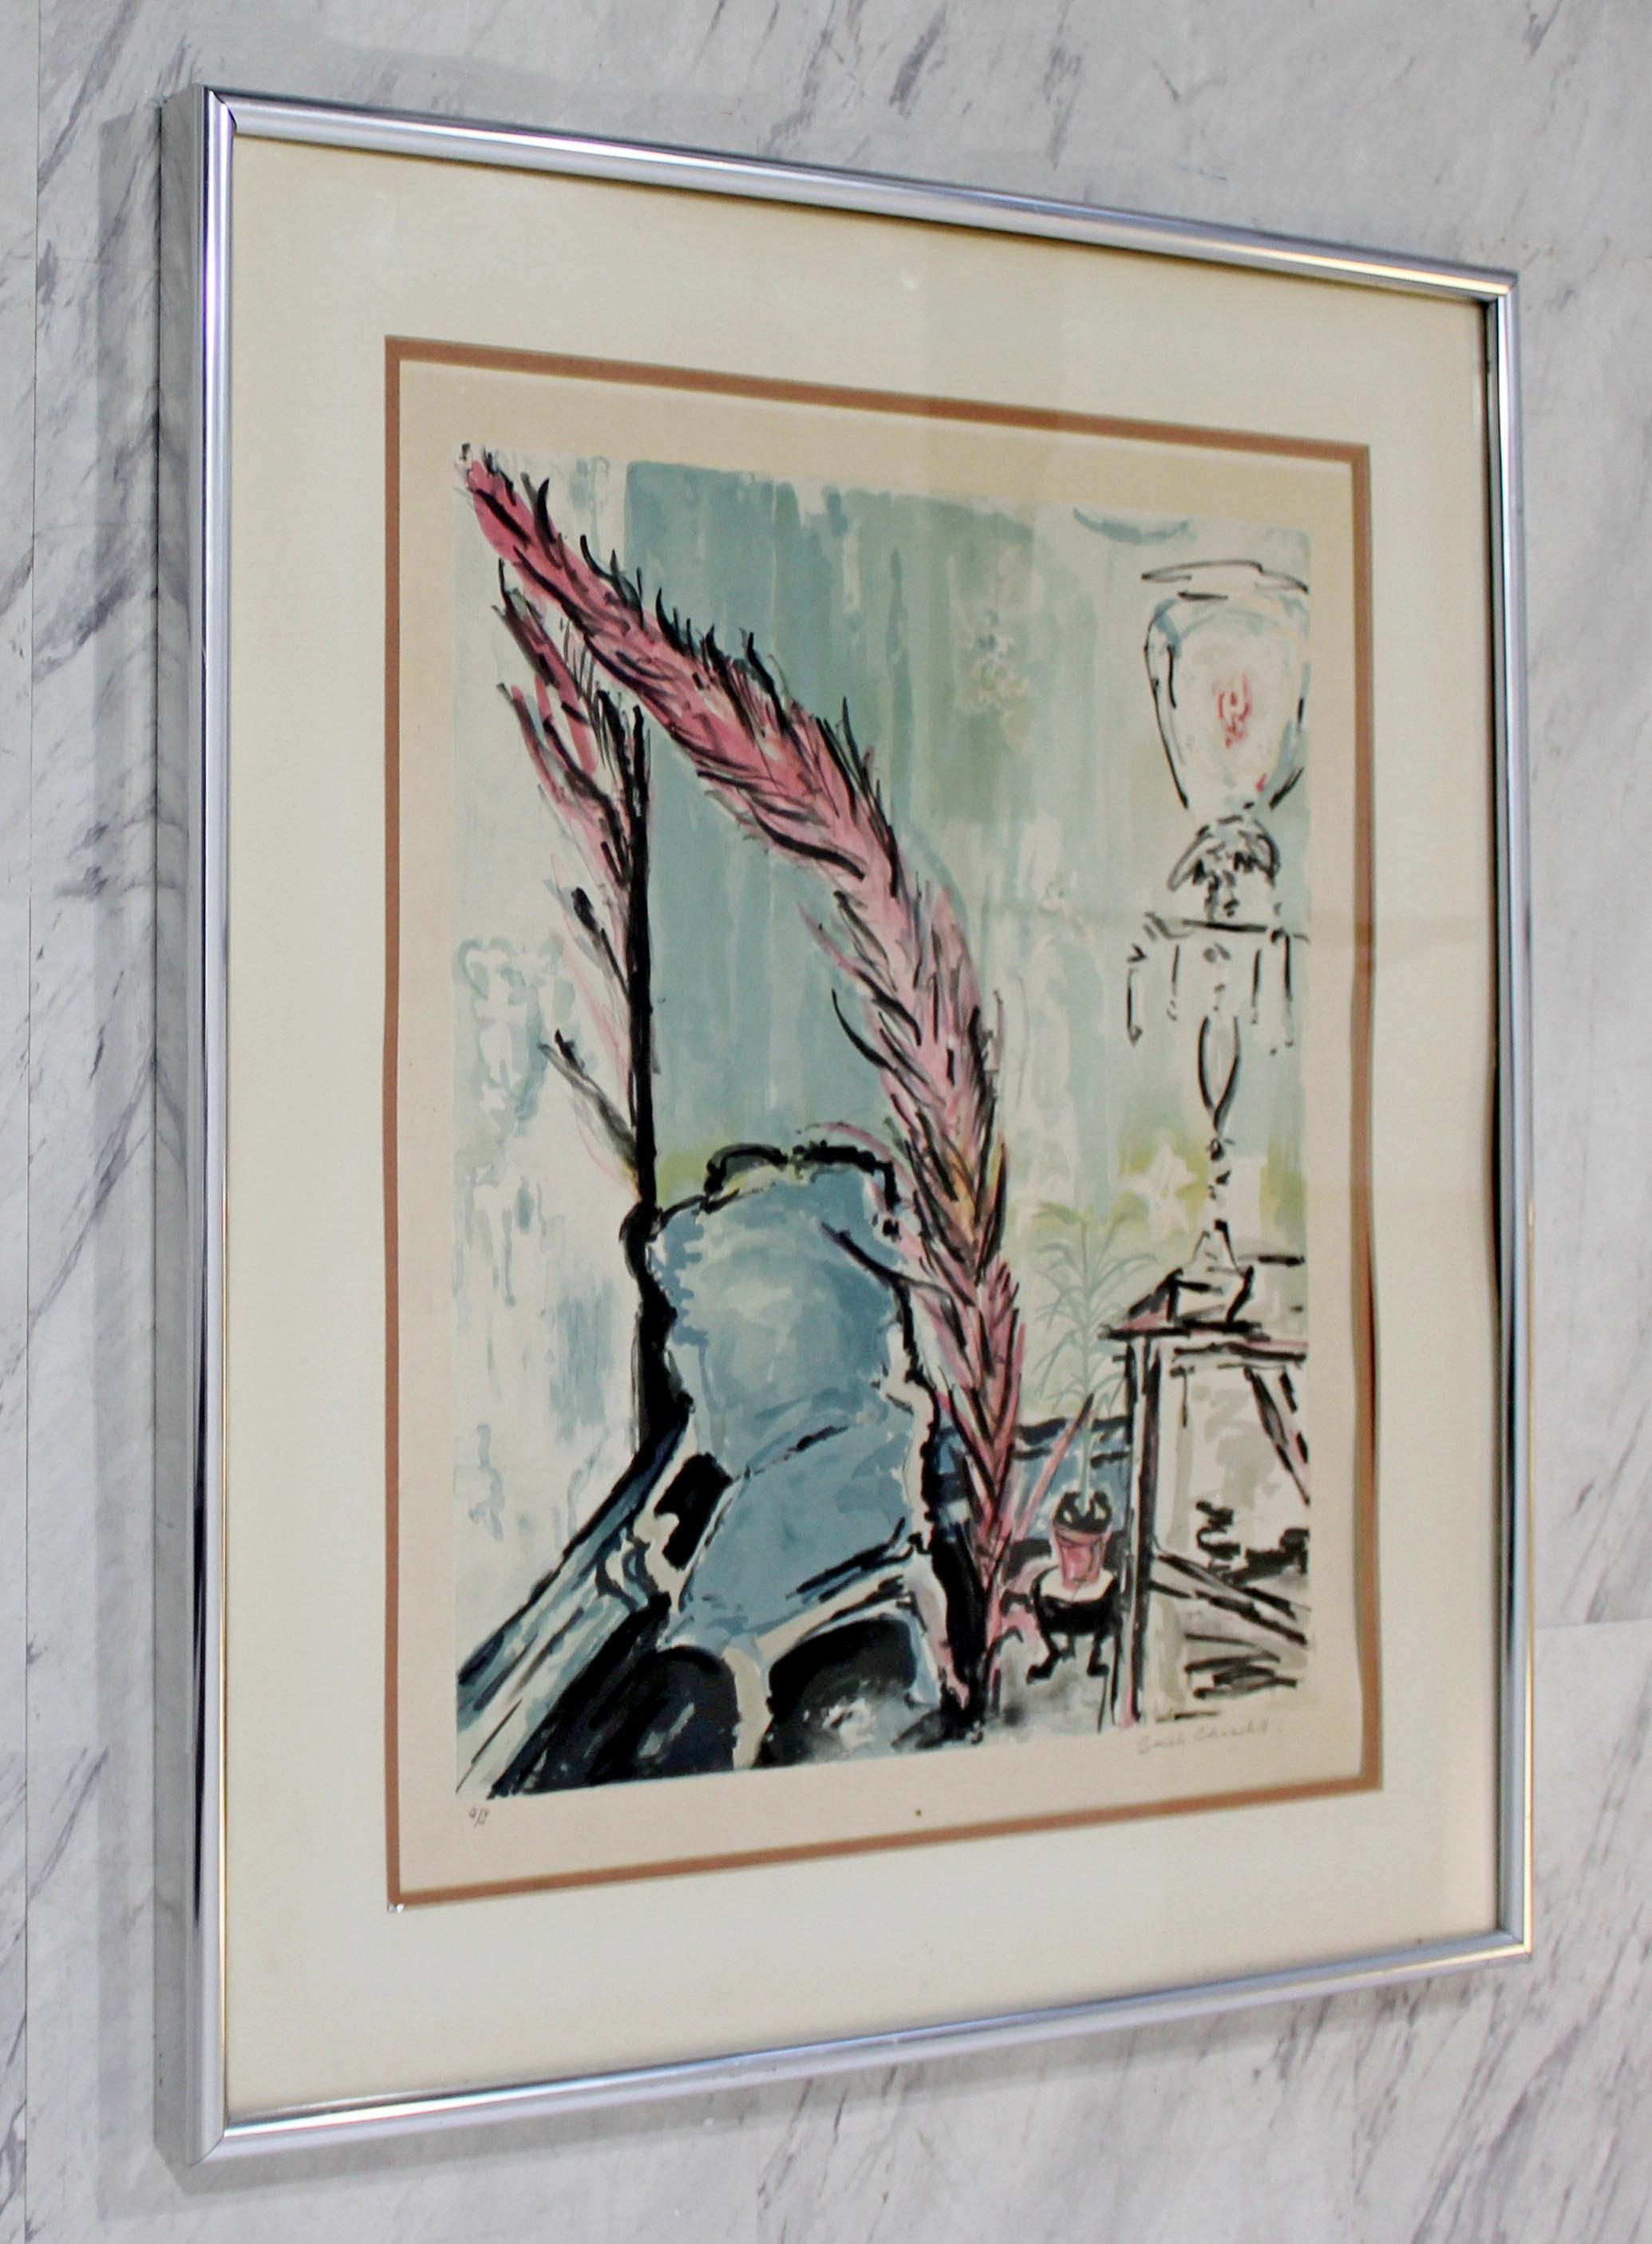 Art Deco Framed Colored Lithograph Signed by Sarah Churchill 67/300